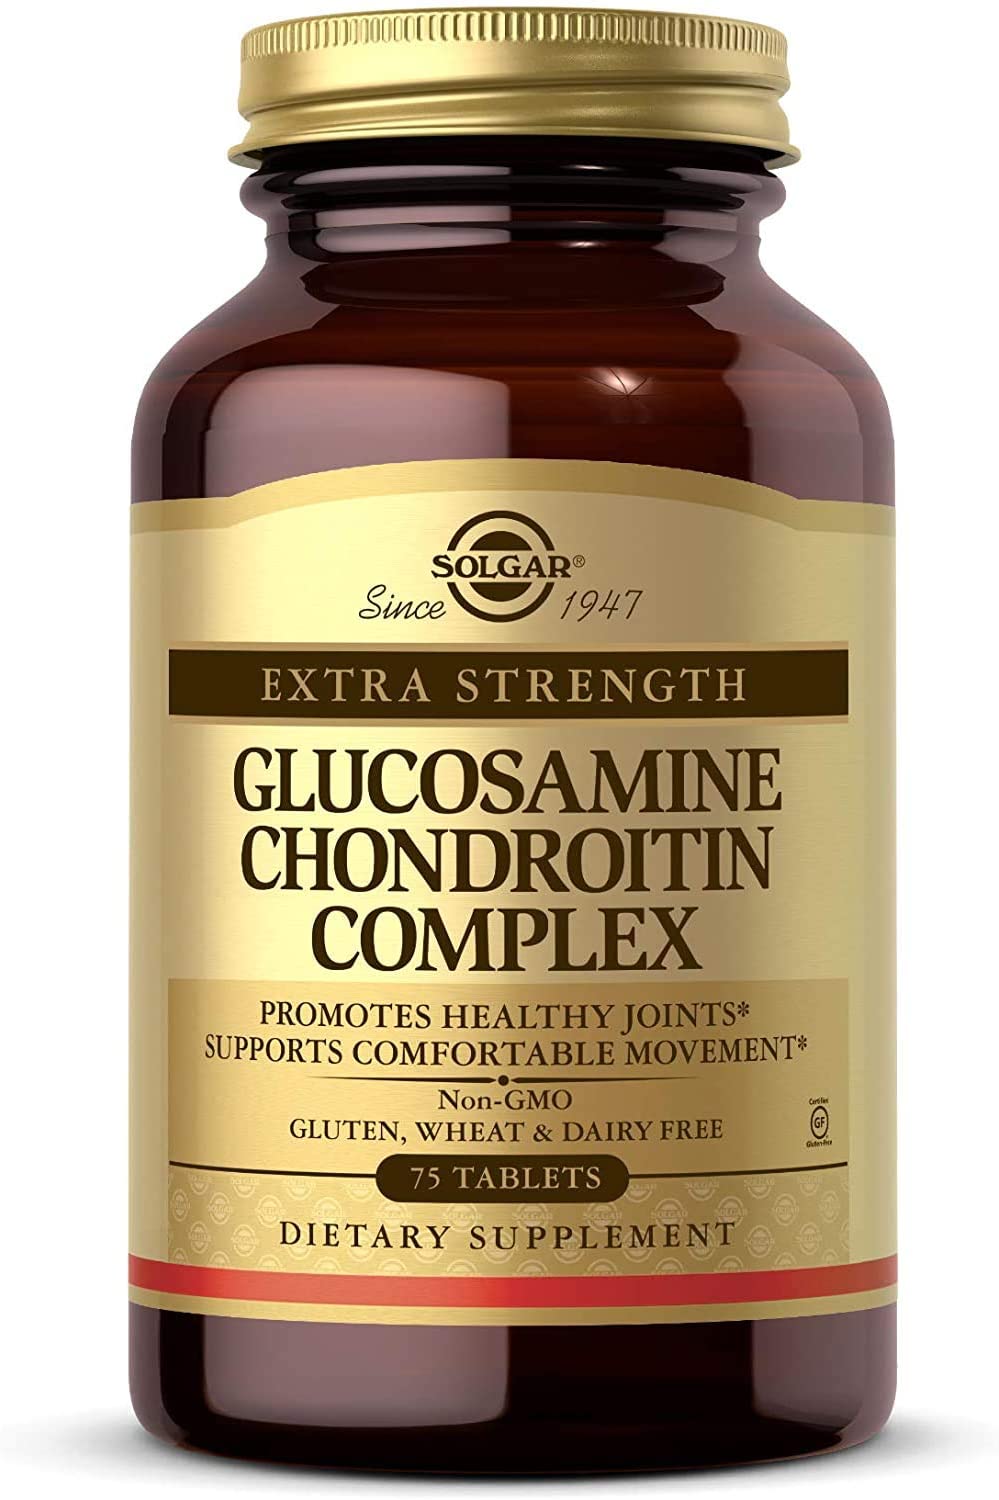 EXTRA STRENGTH GLUCOSAMINE CHONDROITIN COMPLEX TABLETS